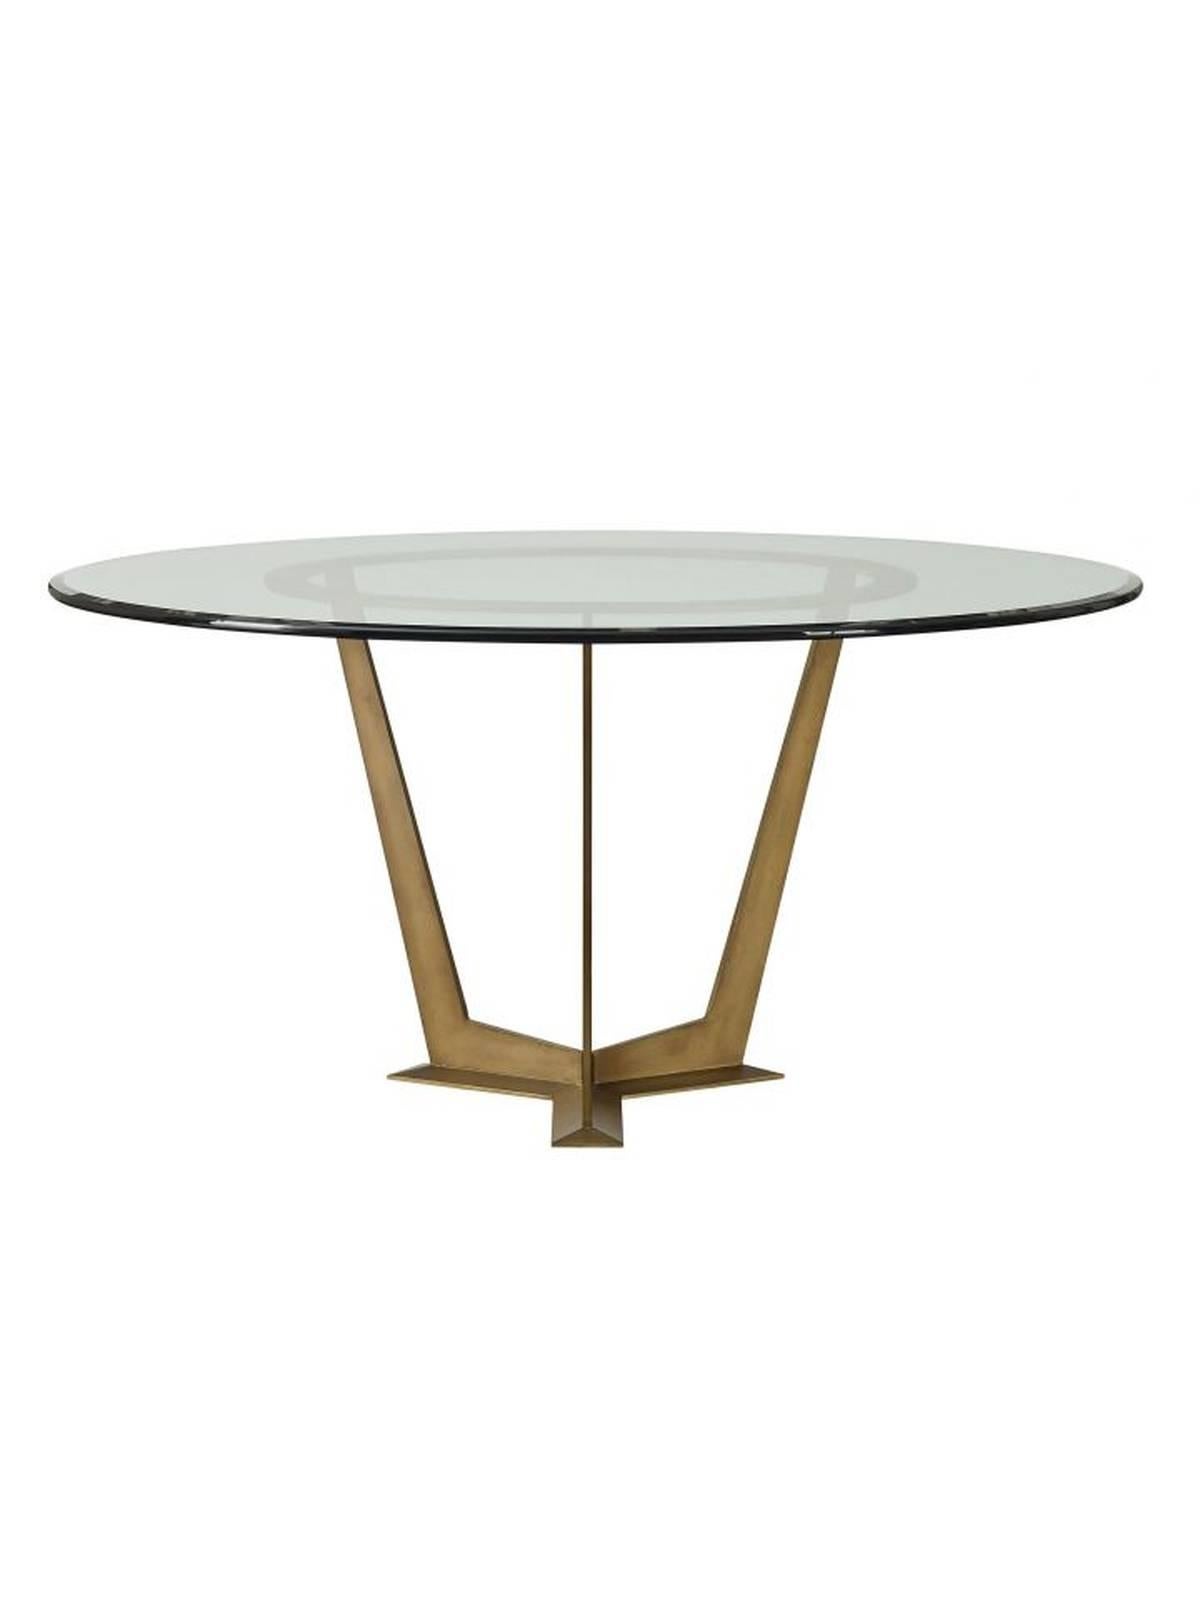 Round glass dining table in the manner of Mastercraft with bronze color steel base. Made to order in the USA.